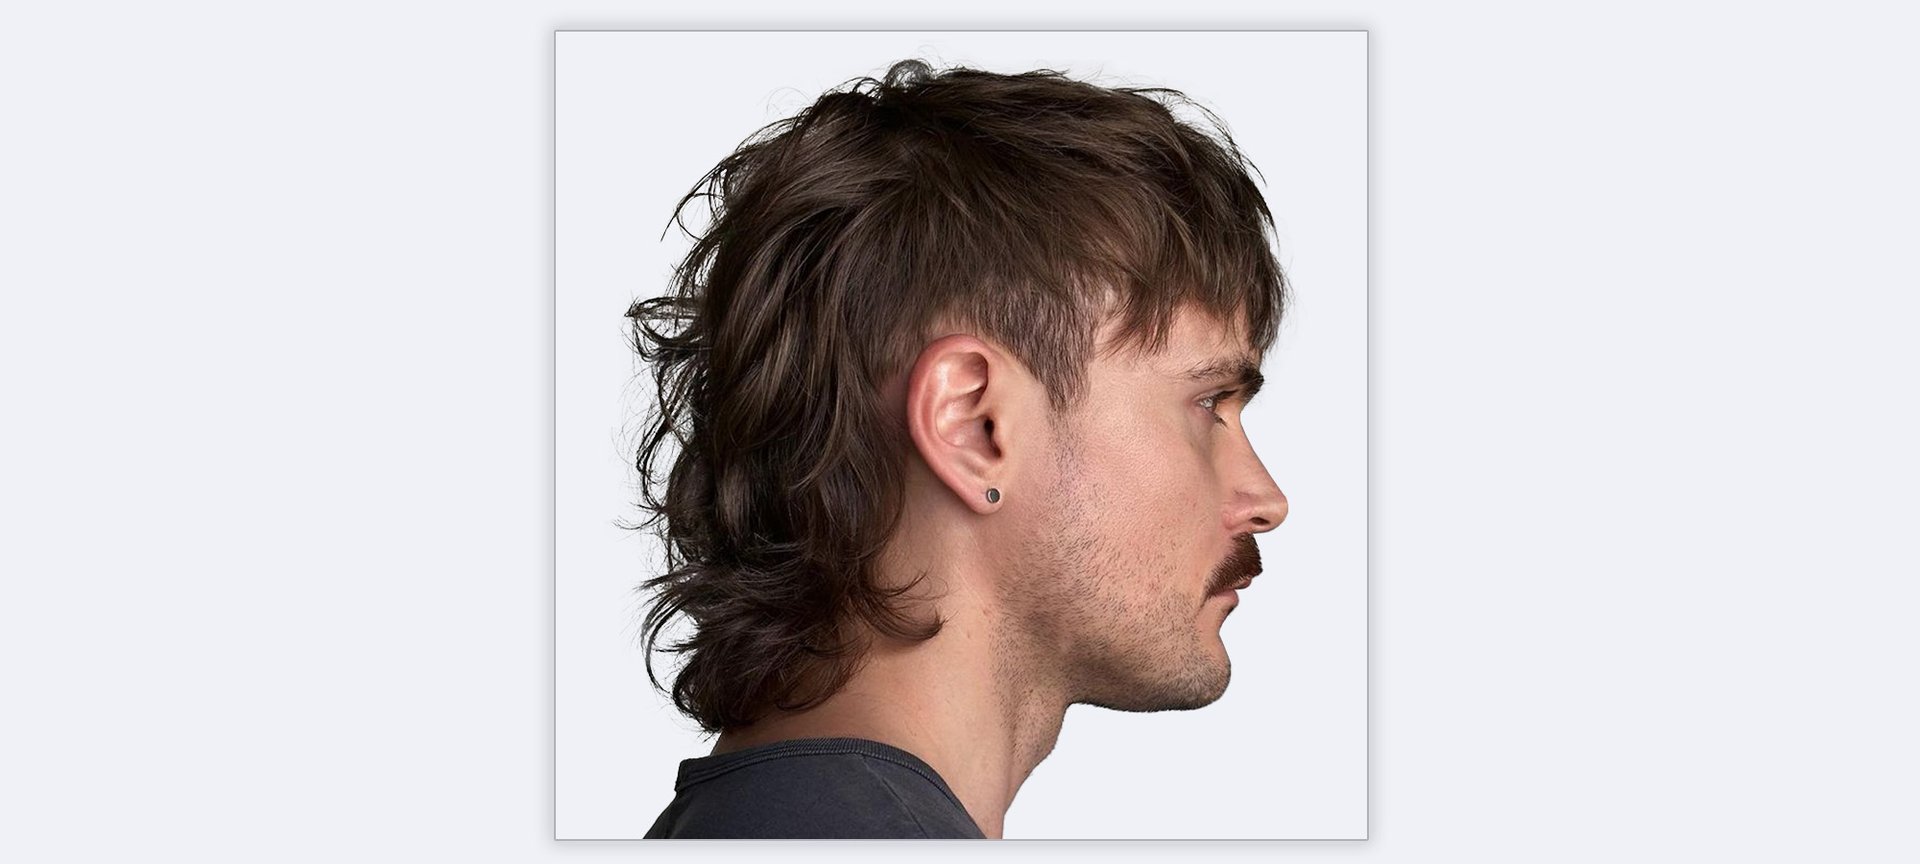 20 Best Men's Haircut For Thin Hair, According To Stylists